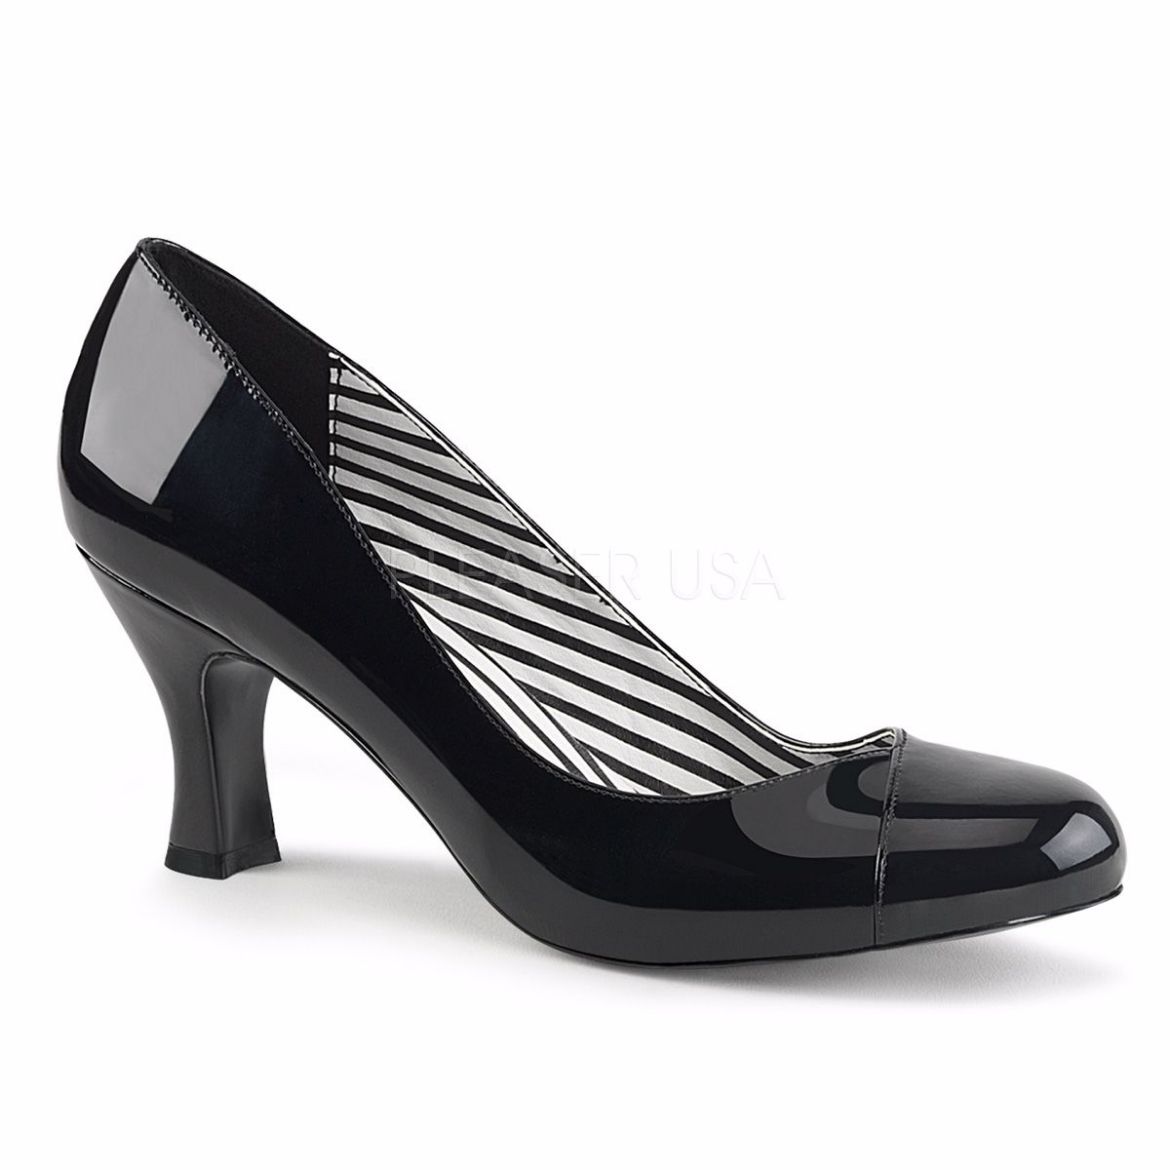 Product image of Pleaser Pink Label Jenna-01 Black Patent, 3 inch (7.6 cm) Heel Court Pump Shoes